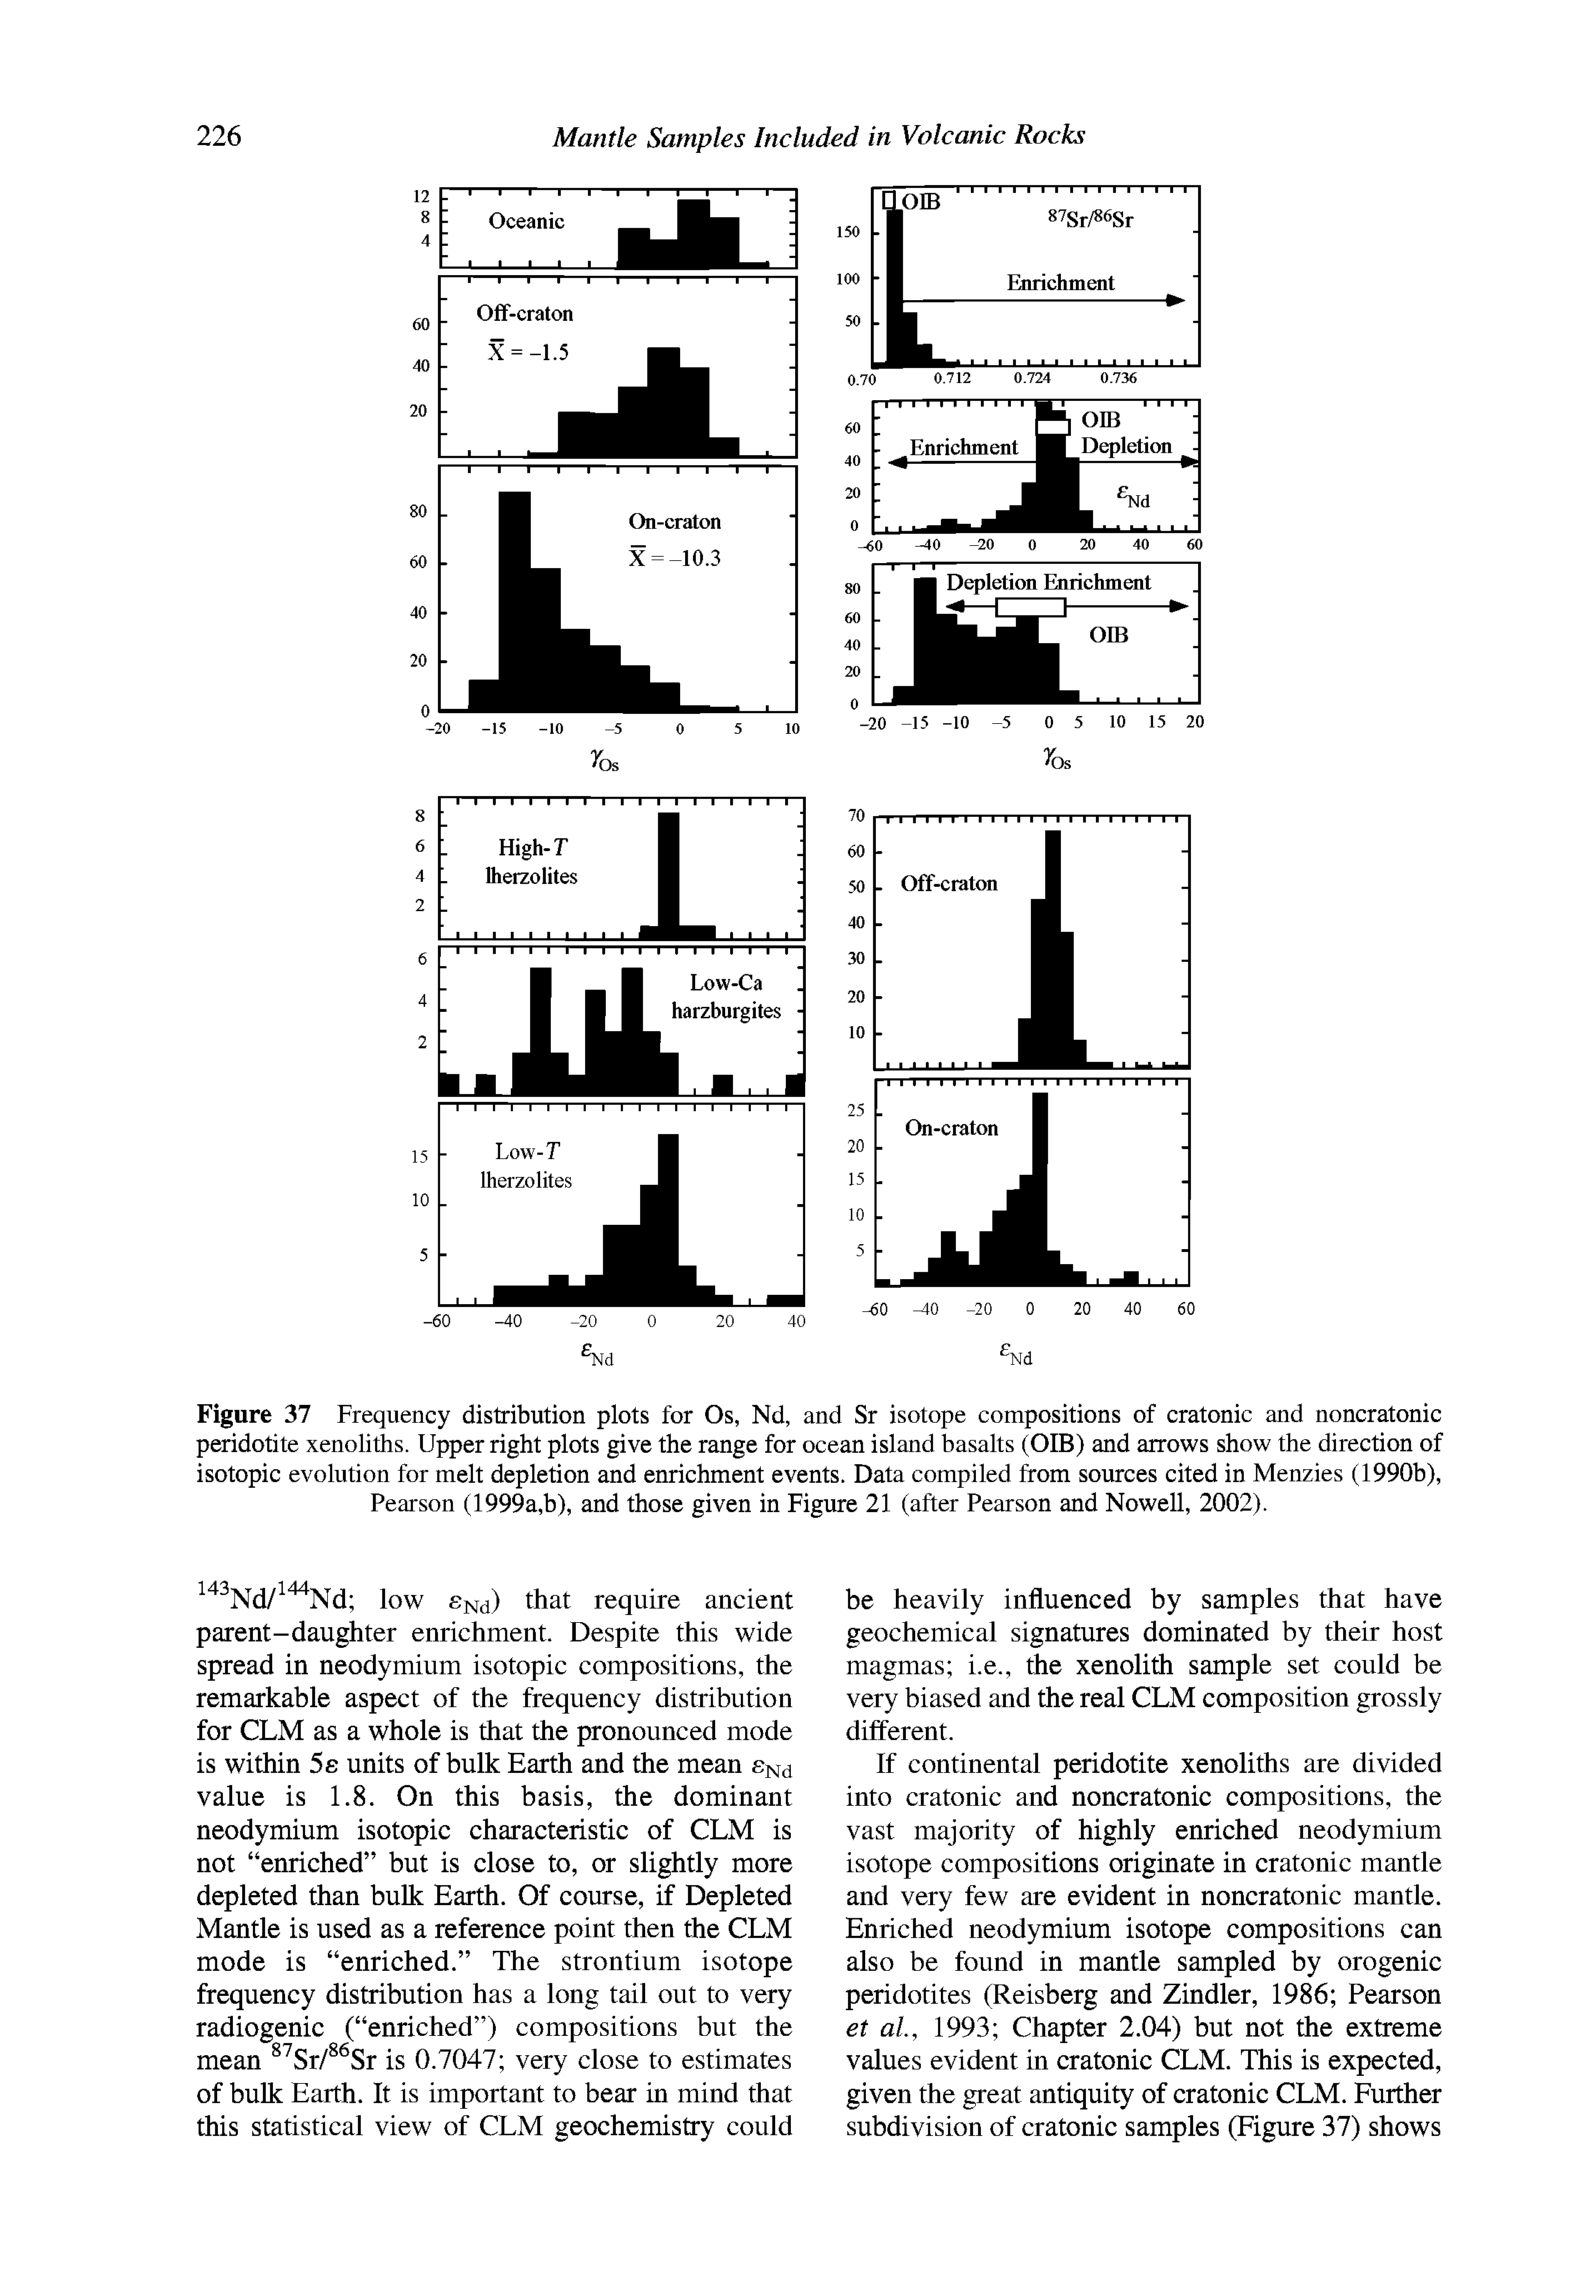 Figure 37 Frequency distribution plots for Os, Nd, and Sr isotope compositions of cratonic and noncratonic peridotite xenoliths. Upper right plots give the range for ocean island basalts (OIB) and arrows show the direction of isotopic evolution for melt depletion and enrichment events. Data compiled from sources cited in Menzies (1990b), Pearson (1999a,b), and those given in Figure 21 (after Pearson and Nowell, 2002).